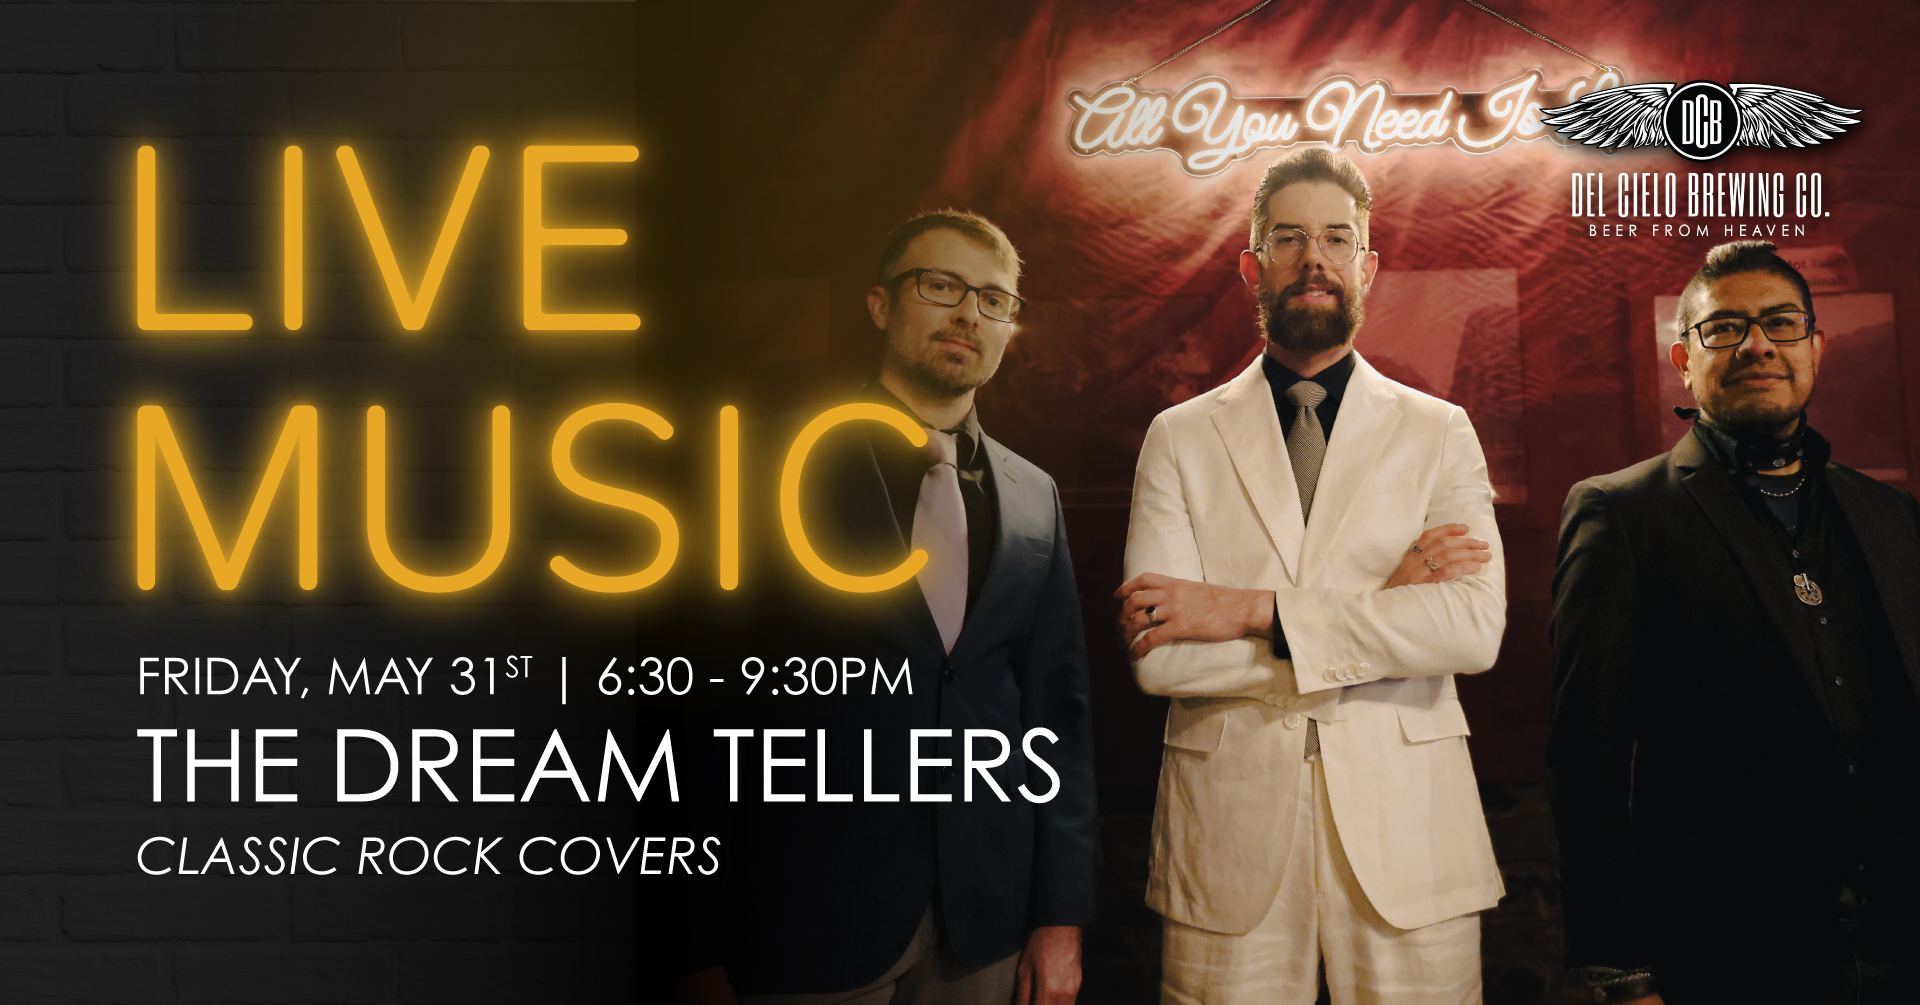 live music the dream tellers classic rock covers